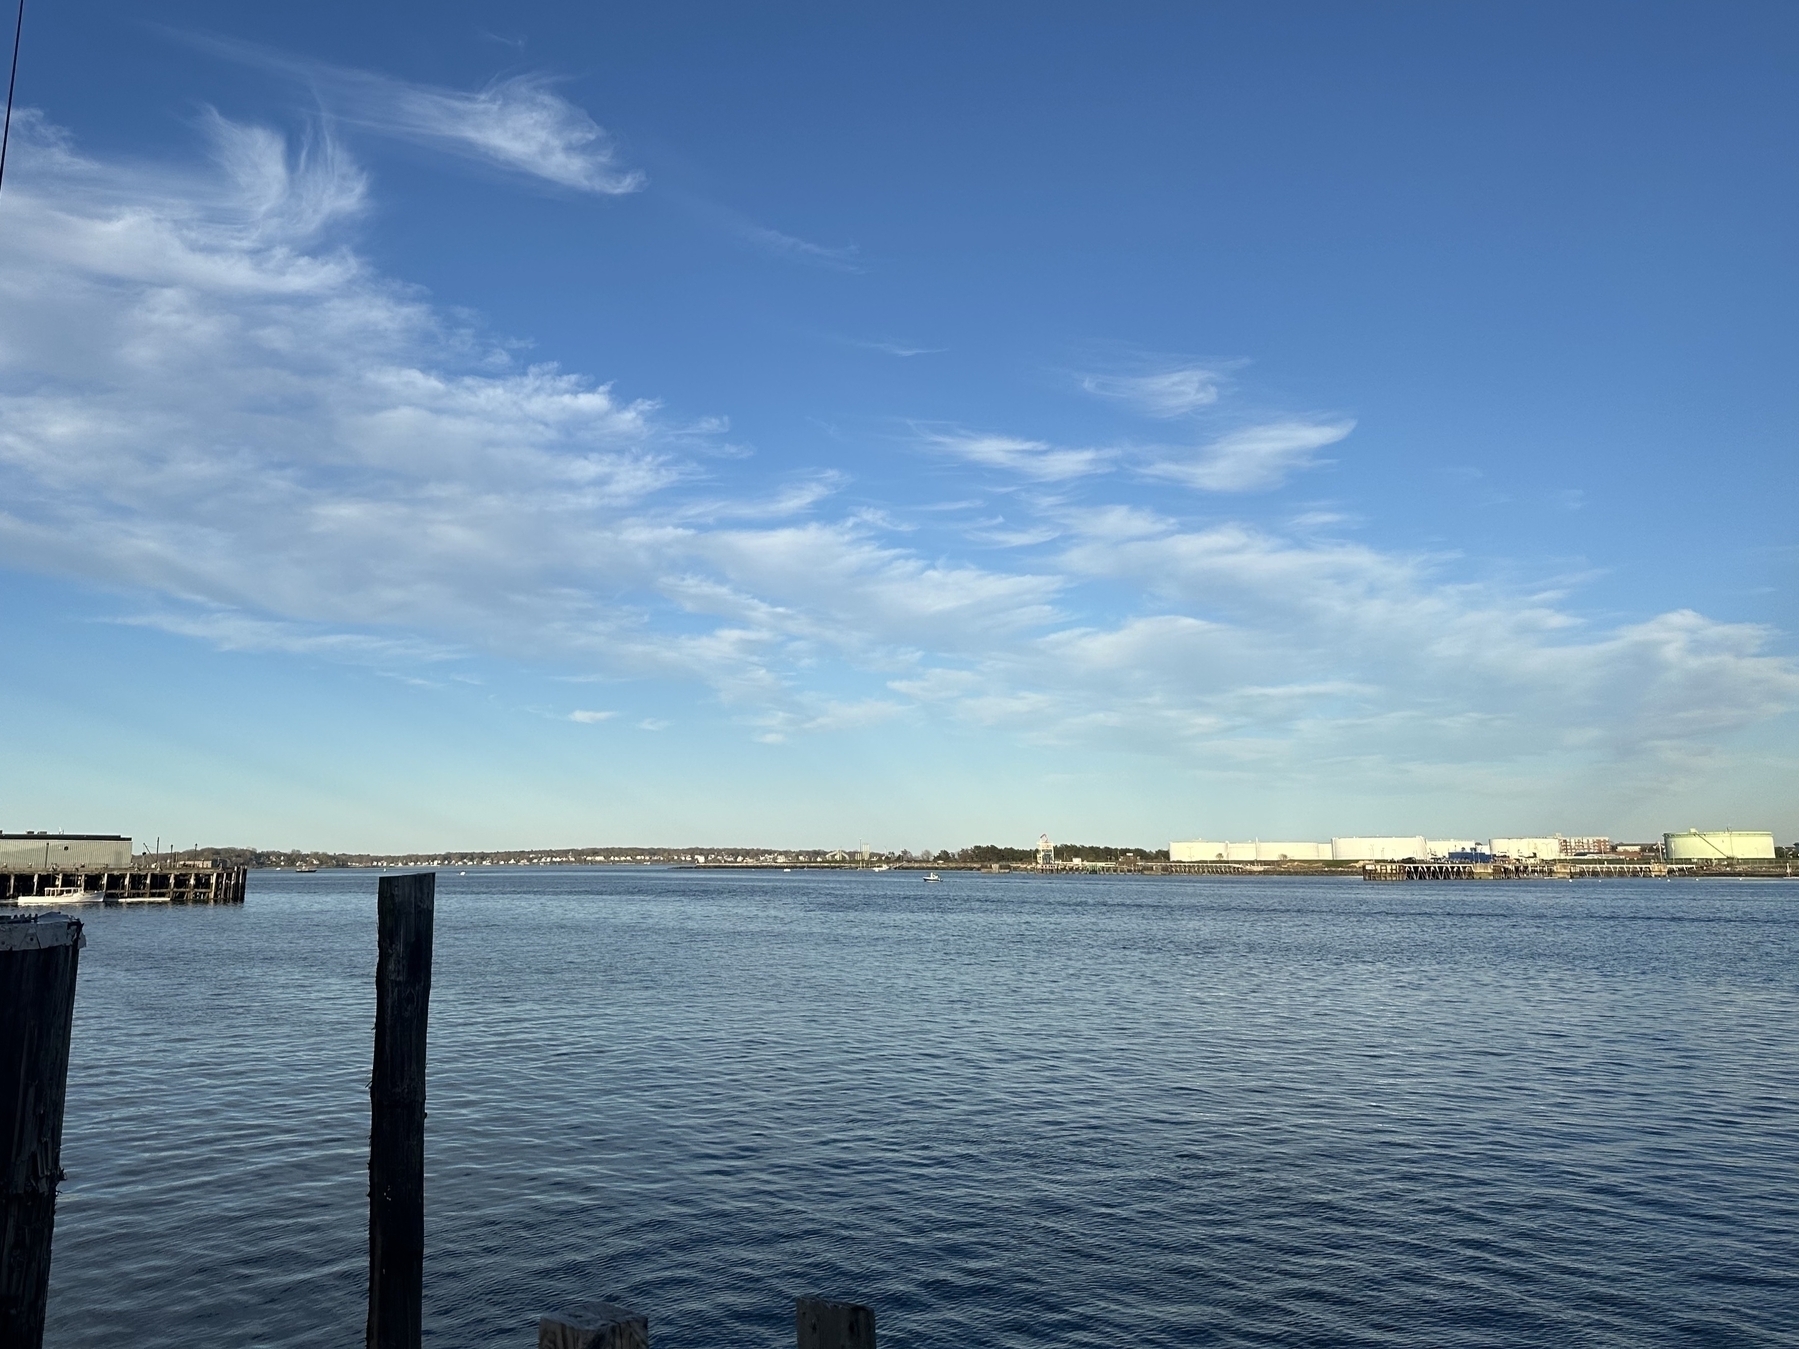 A serene waterscape under a blue sky with wispy clouds, bordered by industrial structures and a pier, suggesting a harbor or coastal area.